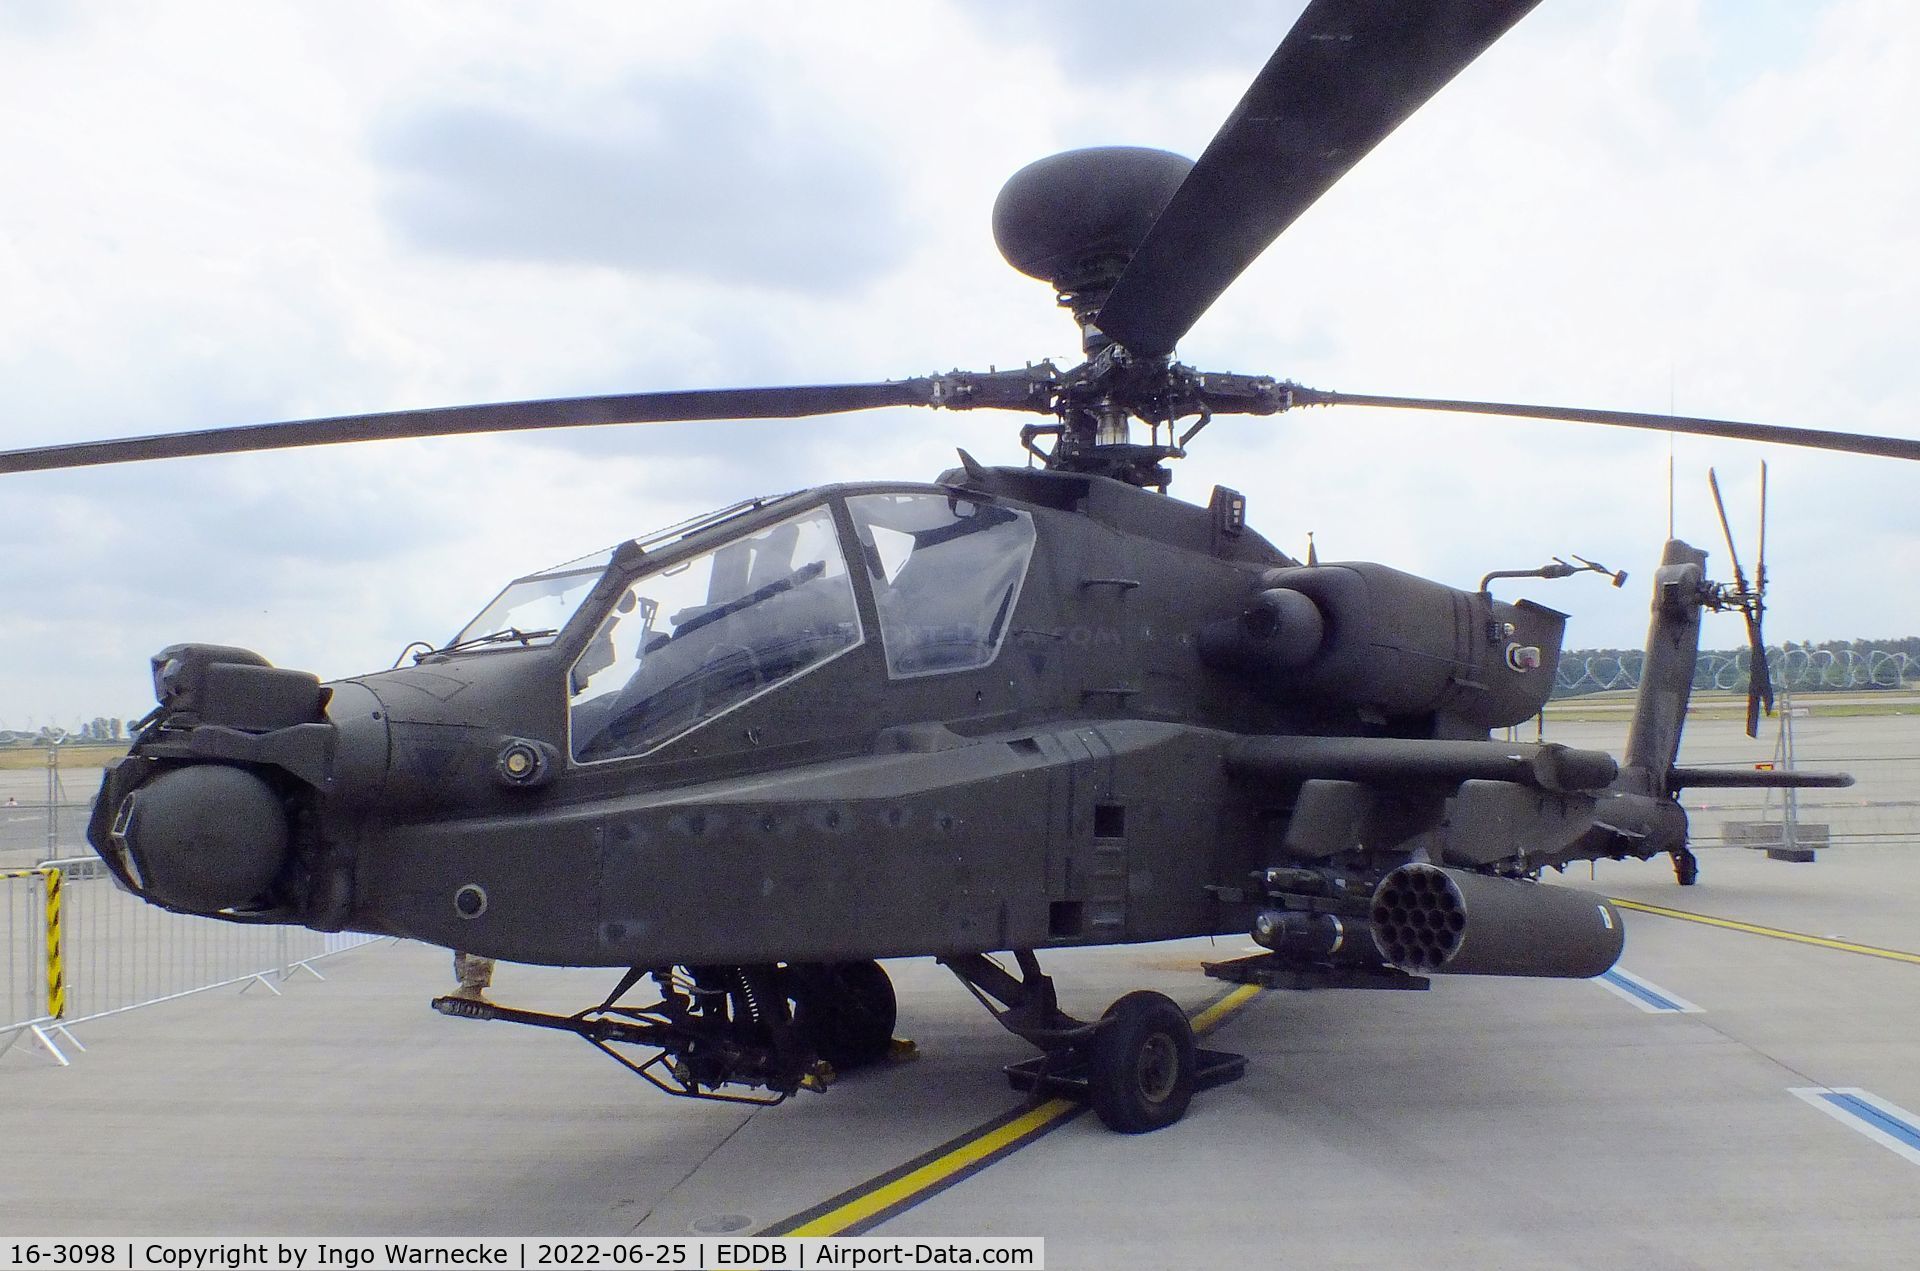 16-3098, 2016 Boeing AH-64E C/N NM098, Boeing AH-64E Apache Guardian of the US Army at ILA 2022, Berlin